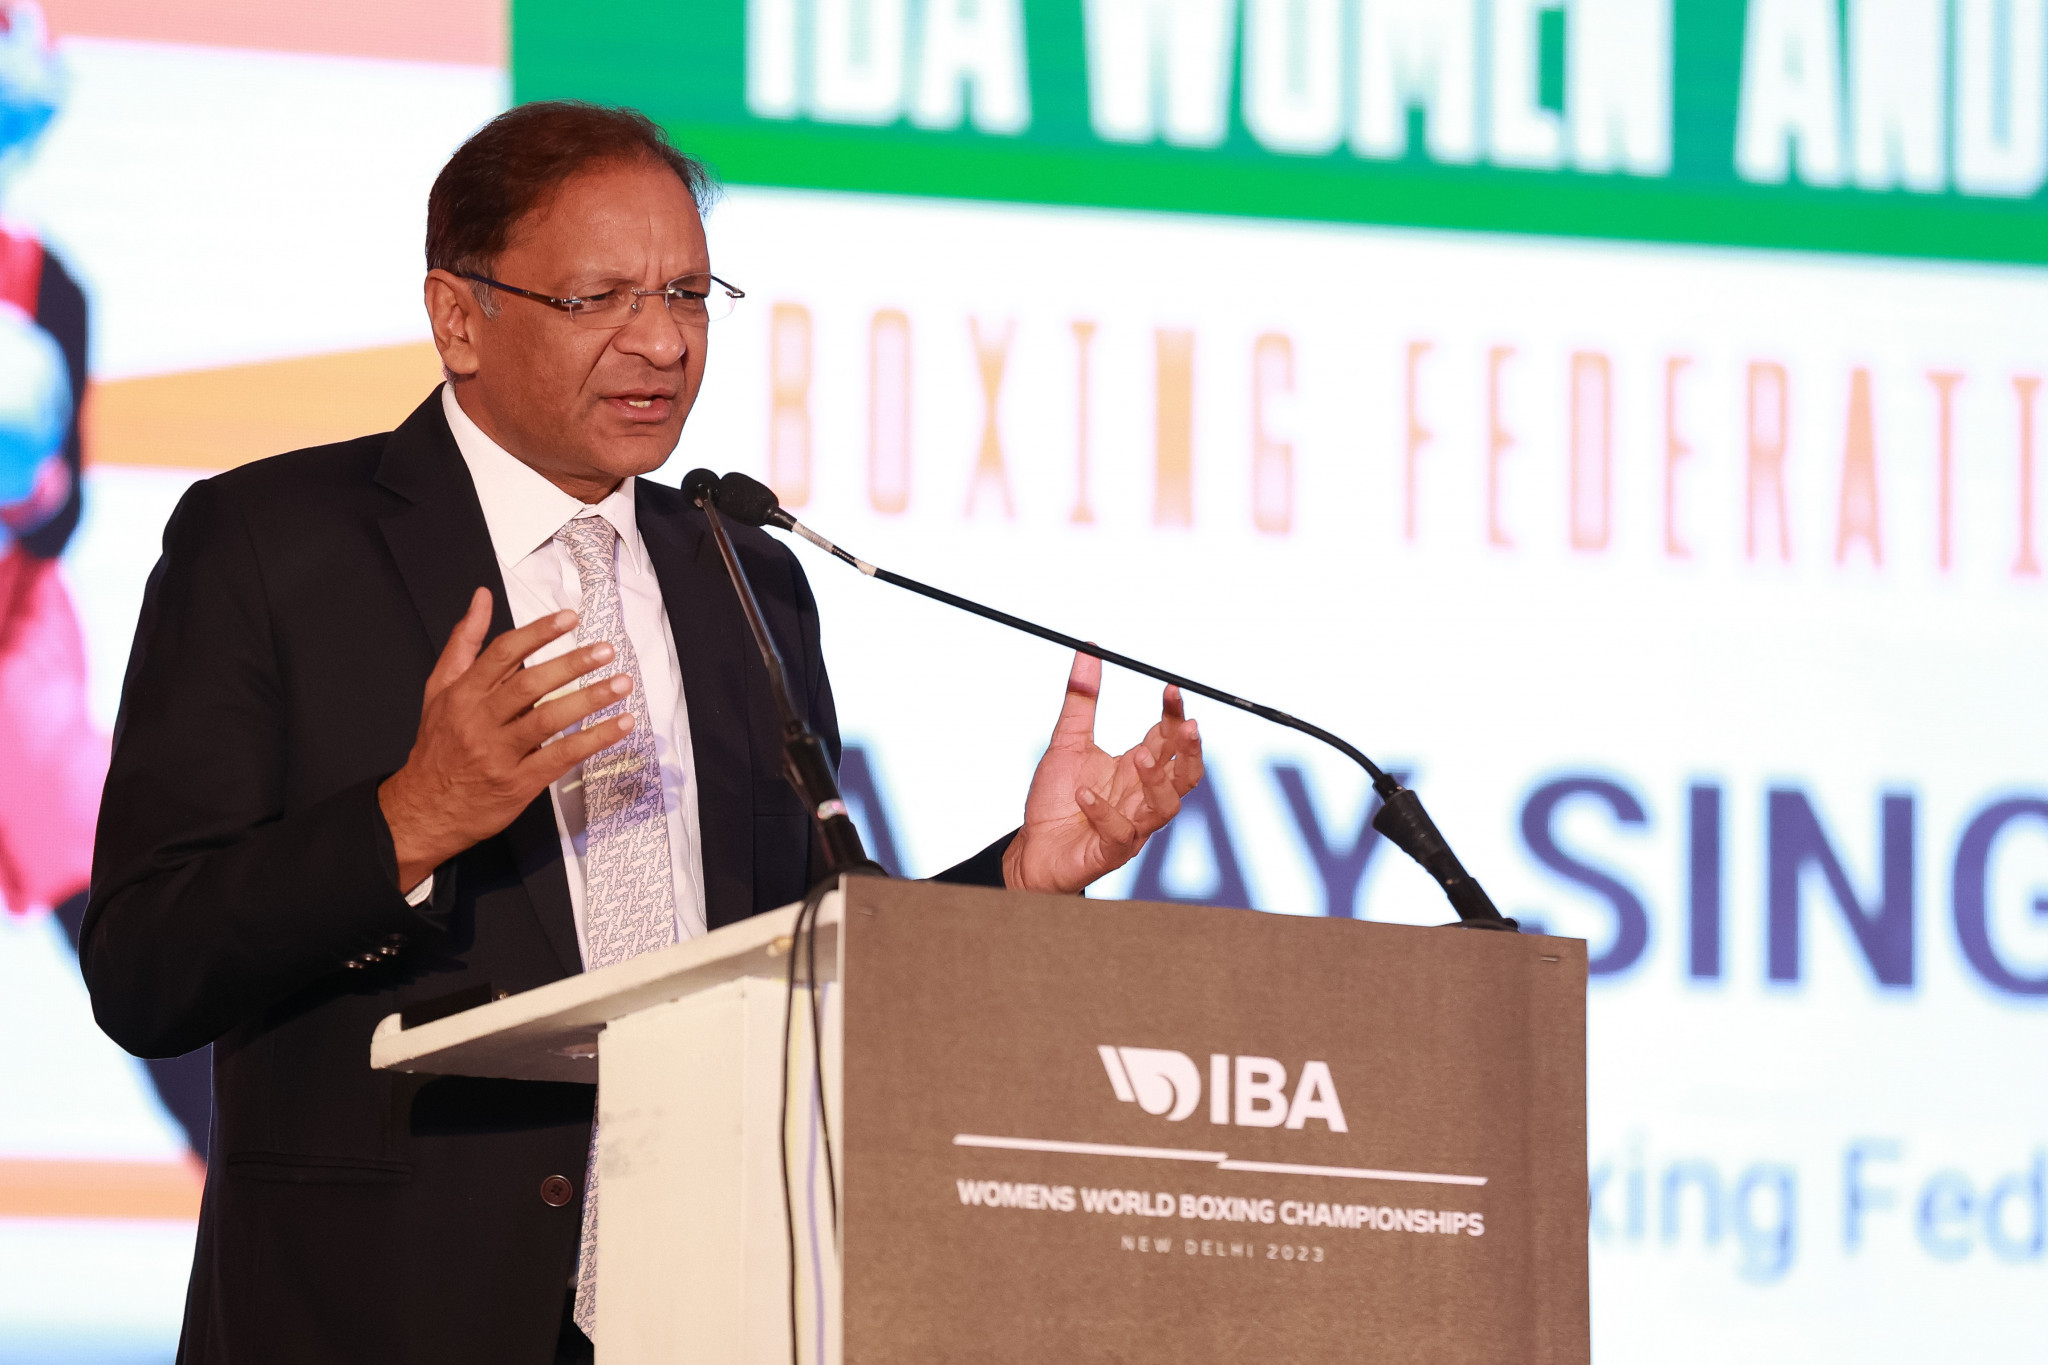 Boxing Federation of India President Aray Singh gave the opening address at the IBA Women and Sport Conference in New Delhi ©IBA